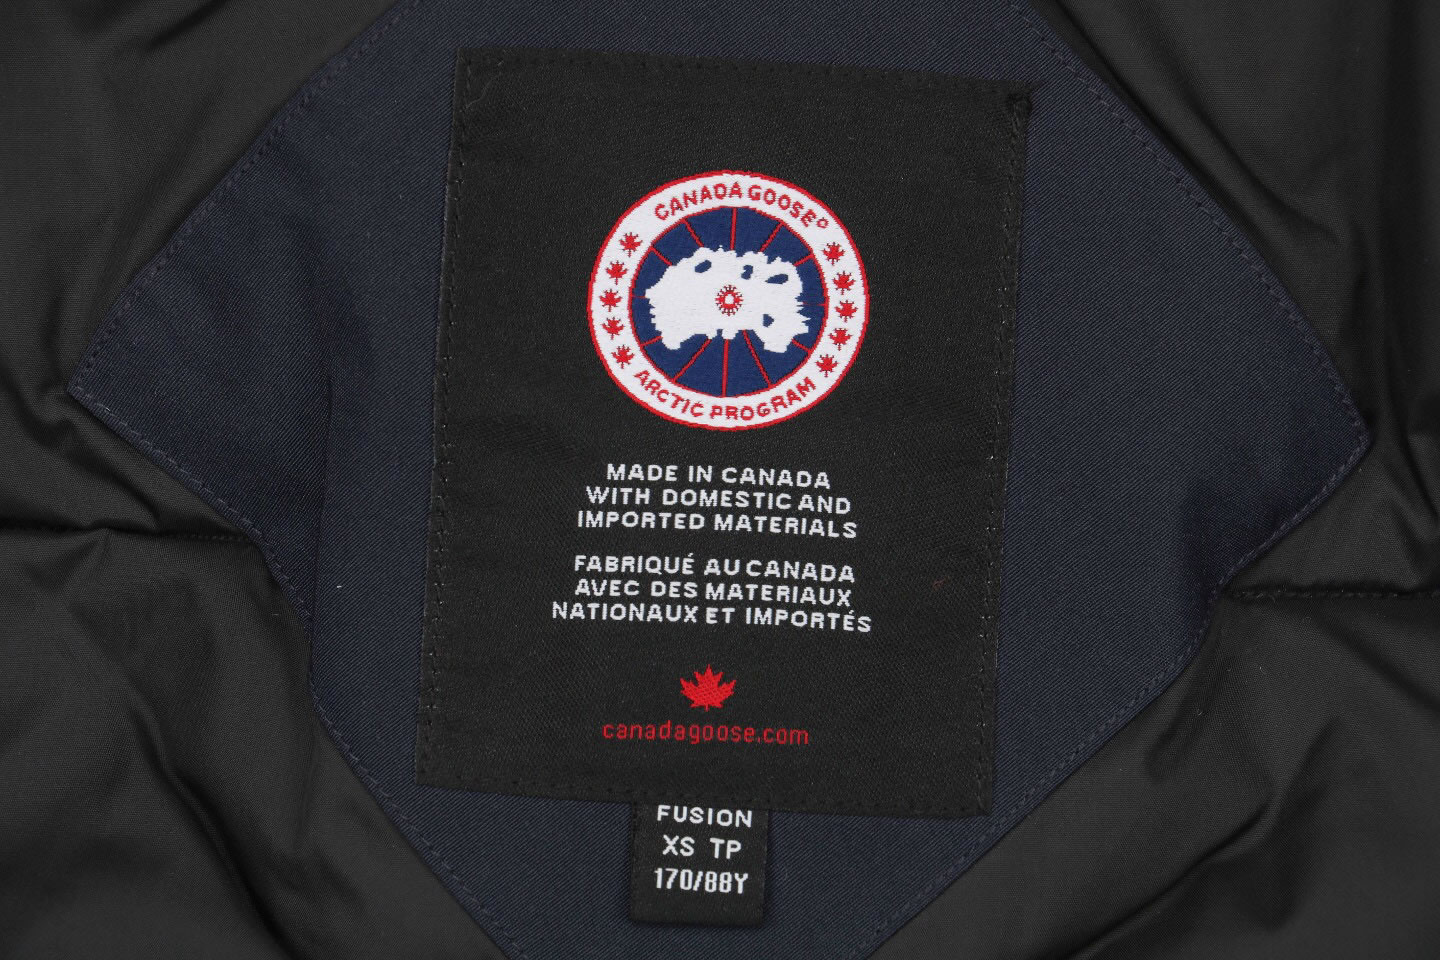 08 Canada Goose 19fw Expedition 4660ma Down Jacket Coat Navy Blue (9) - newkick.org